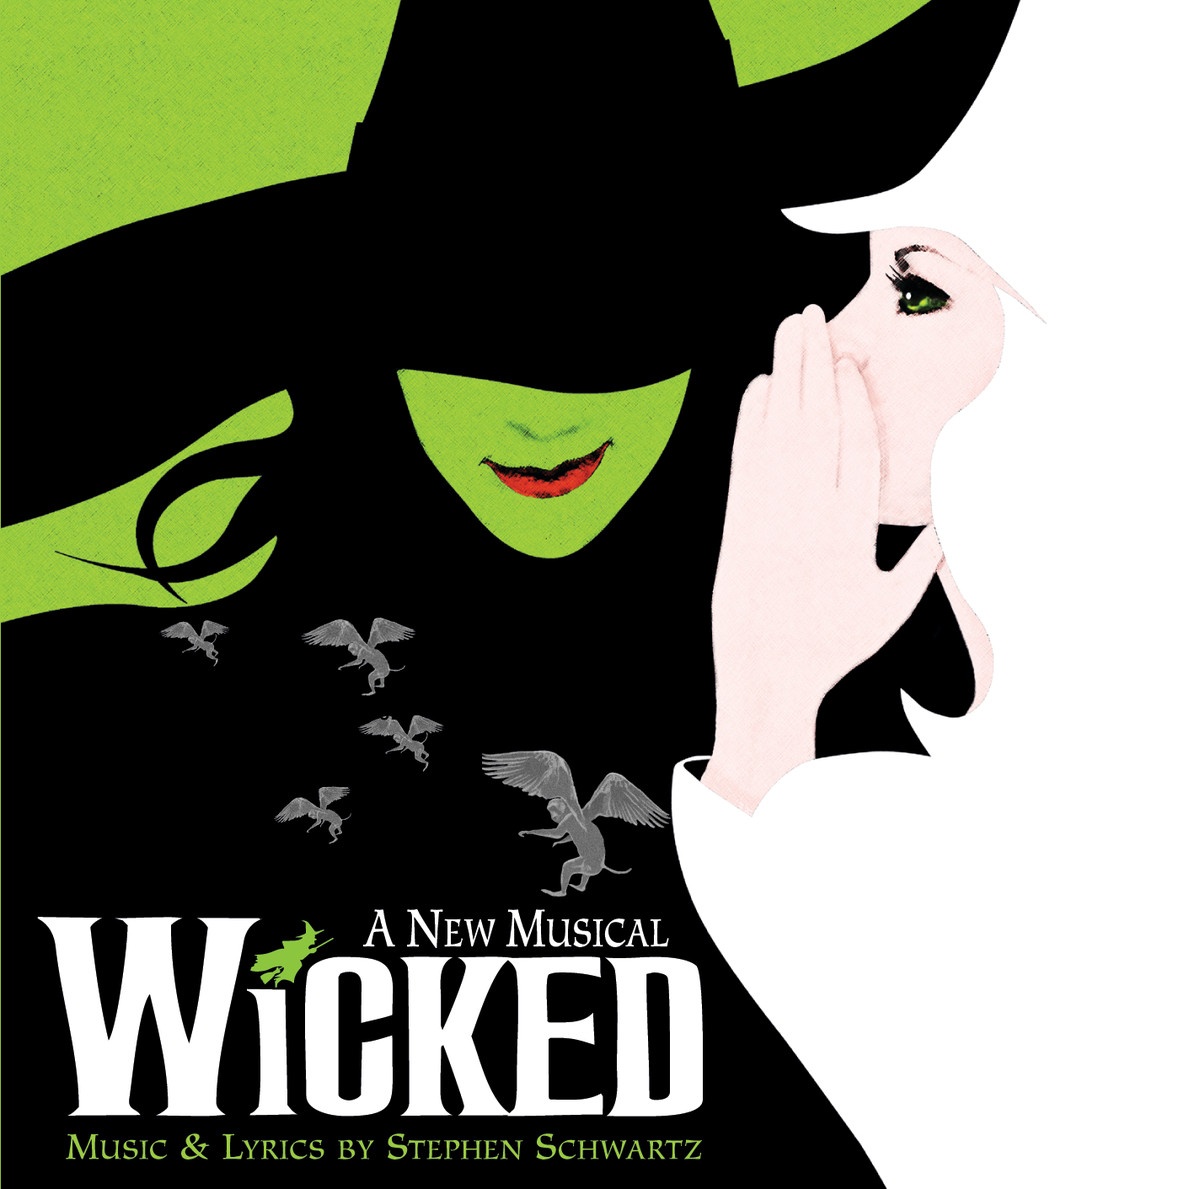 No Good Deed - From "Wicked" Original Broadway Cast Recording/2003